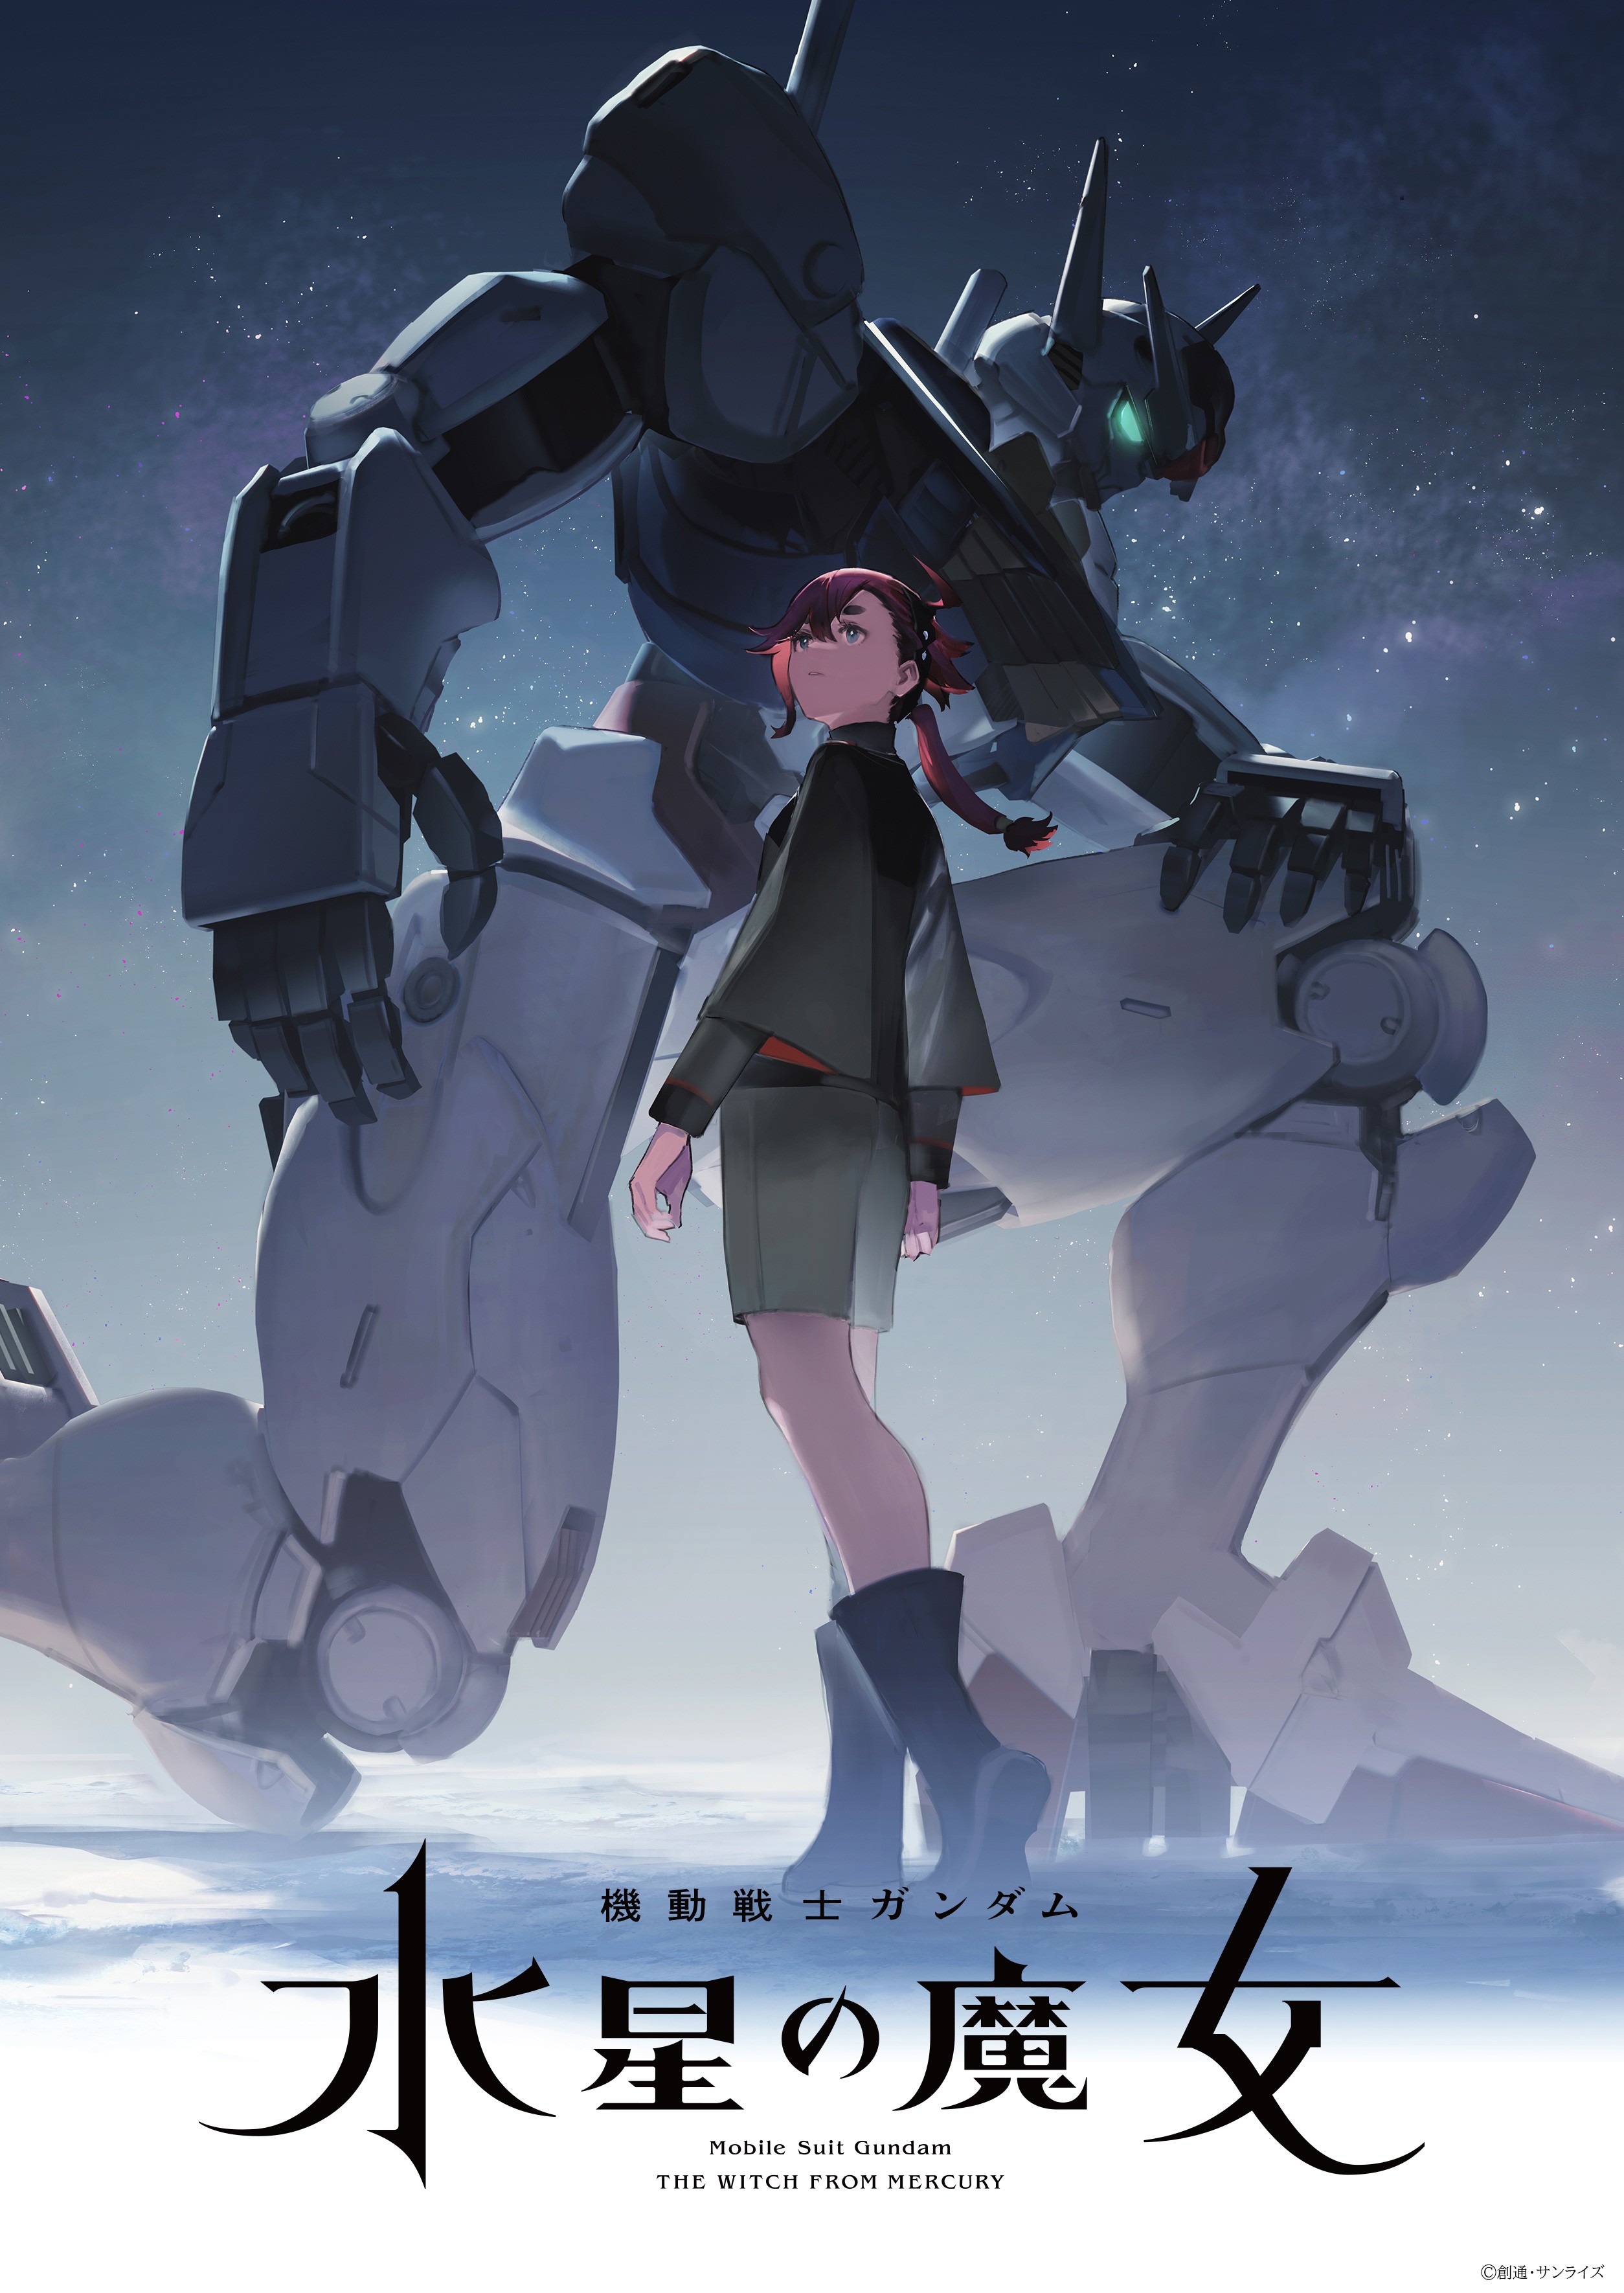 Mobile-Suit-Gundam_THE-WITCH-FROM-MERCURY_teaser-visual.jpg